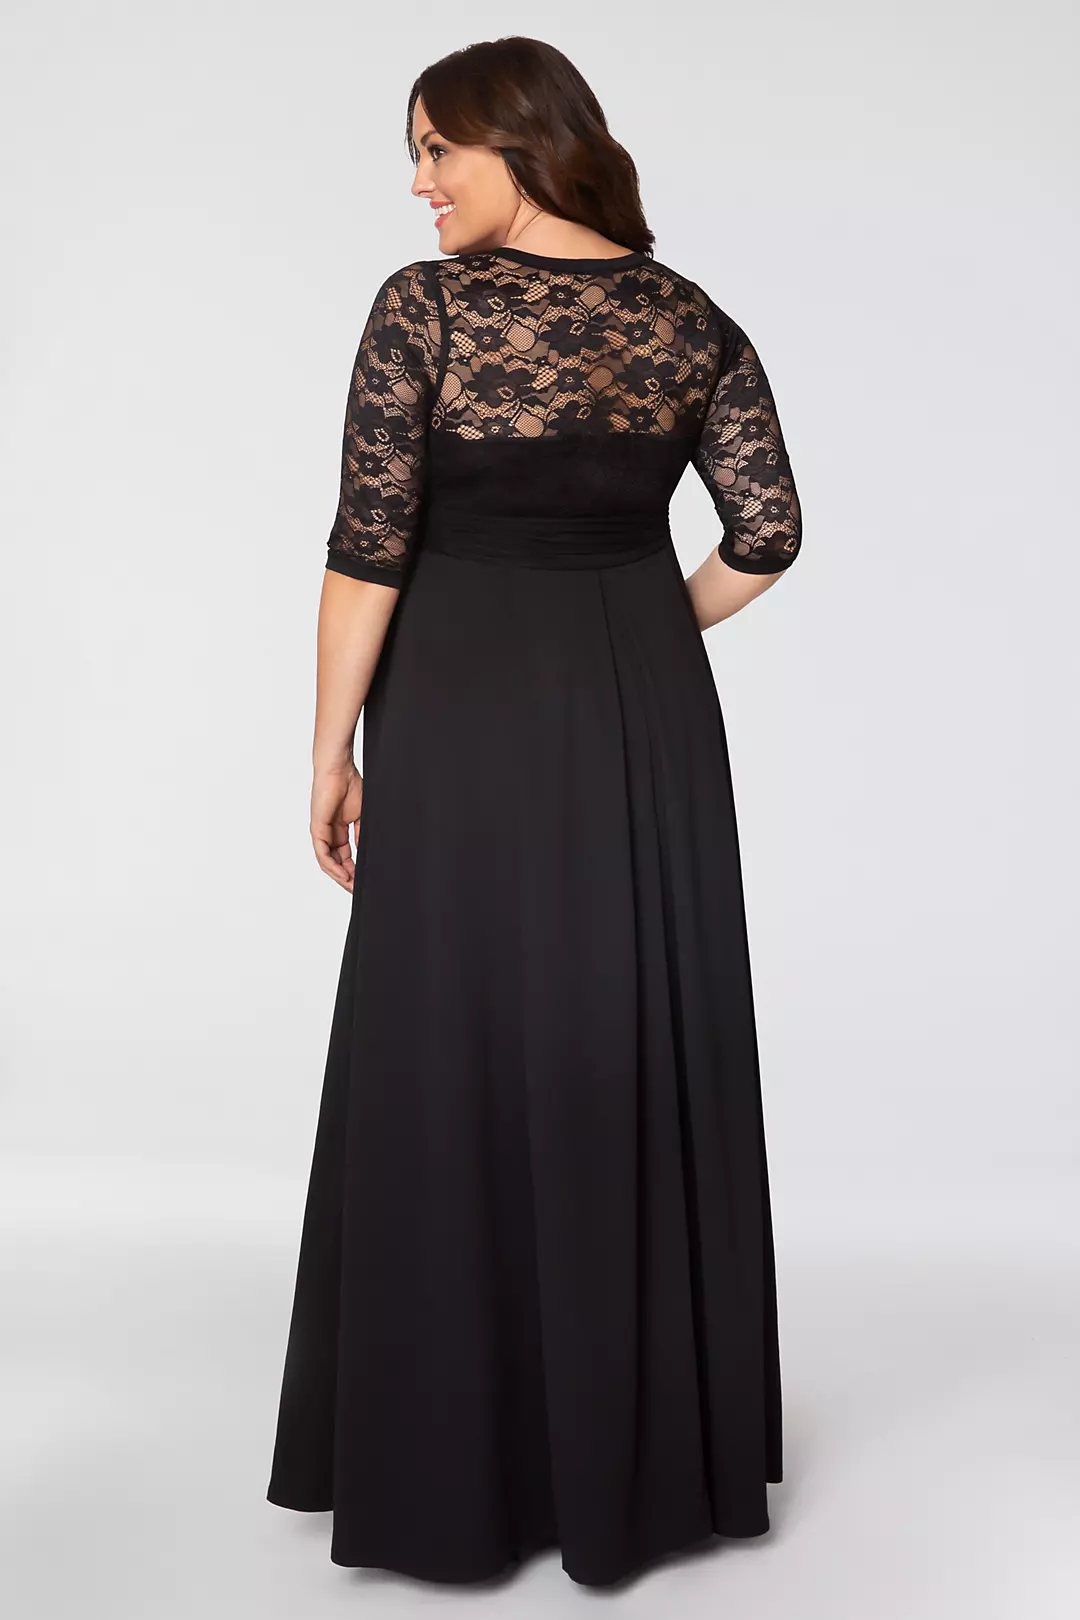 Madeline Plus Size Evening Gown Image 2